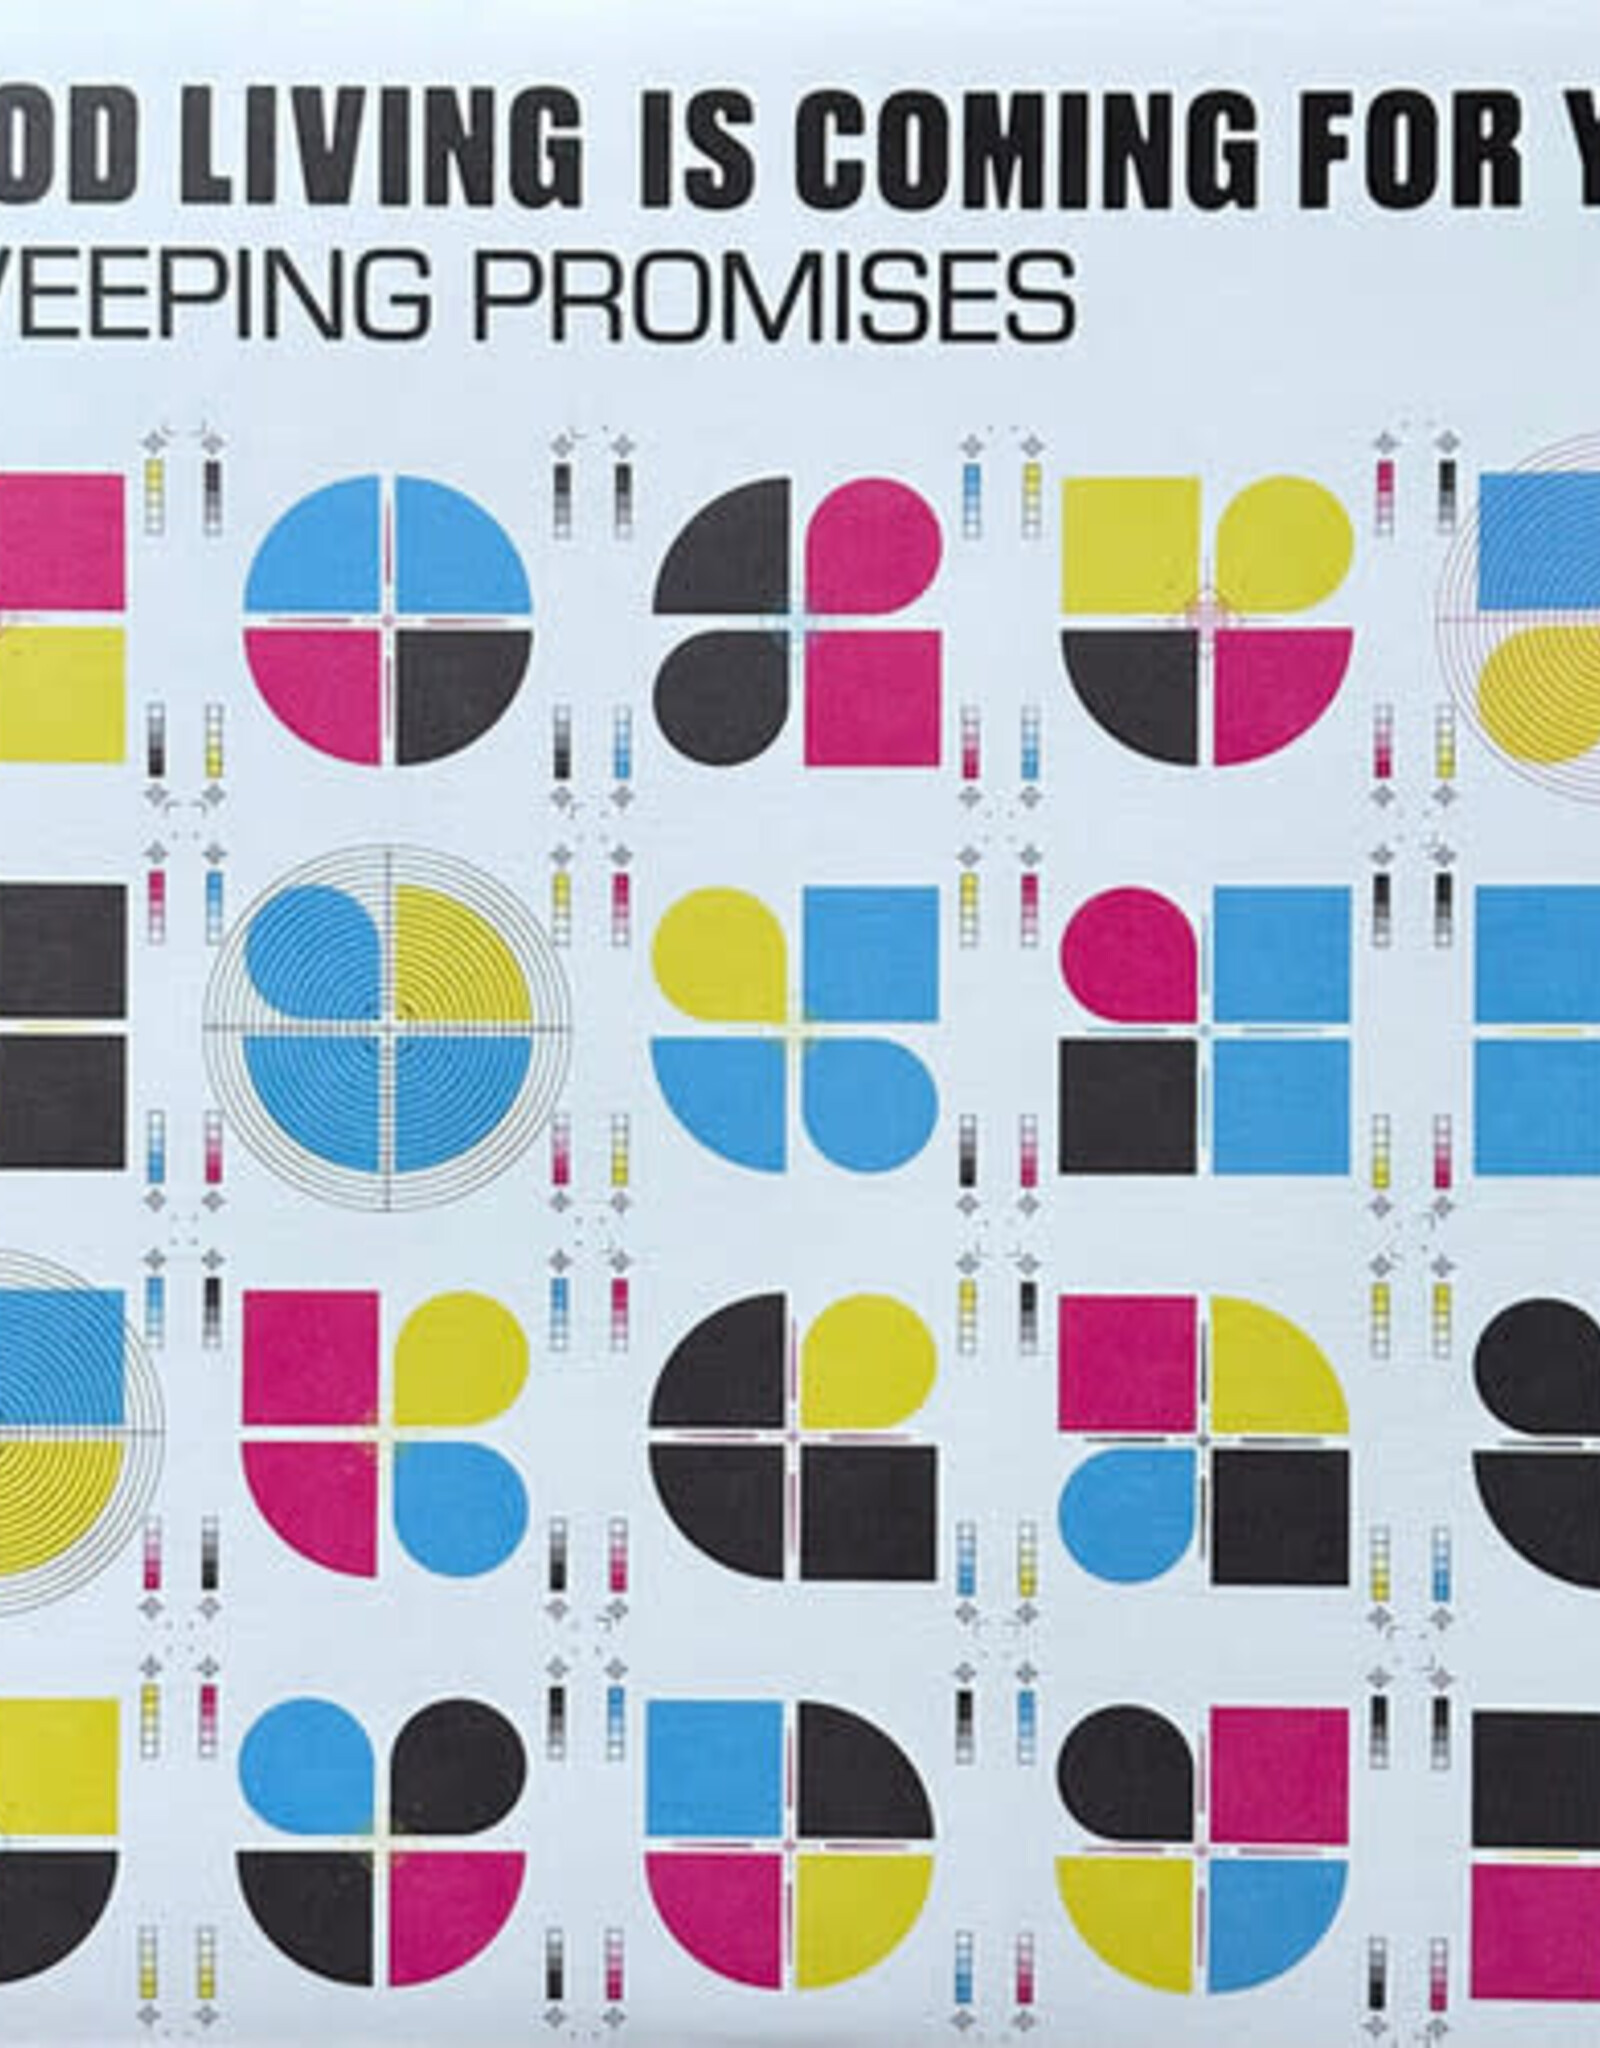 Sweeping Promises - Good Living Is Coming For You